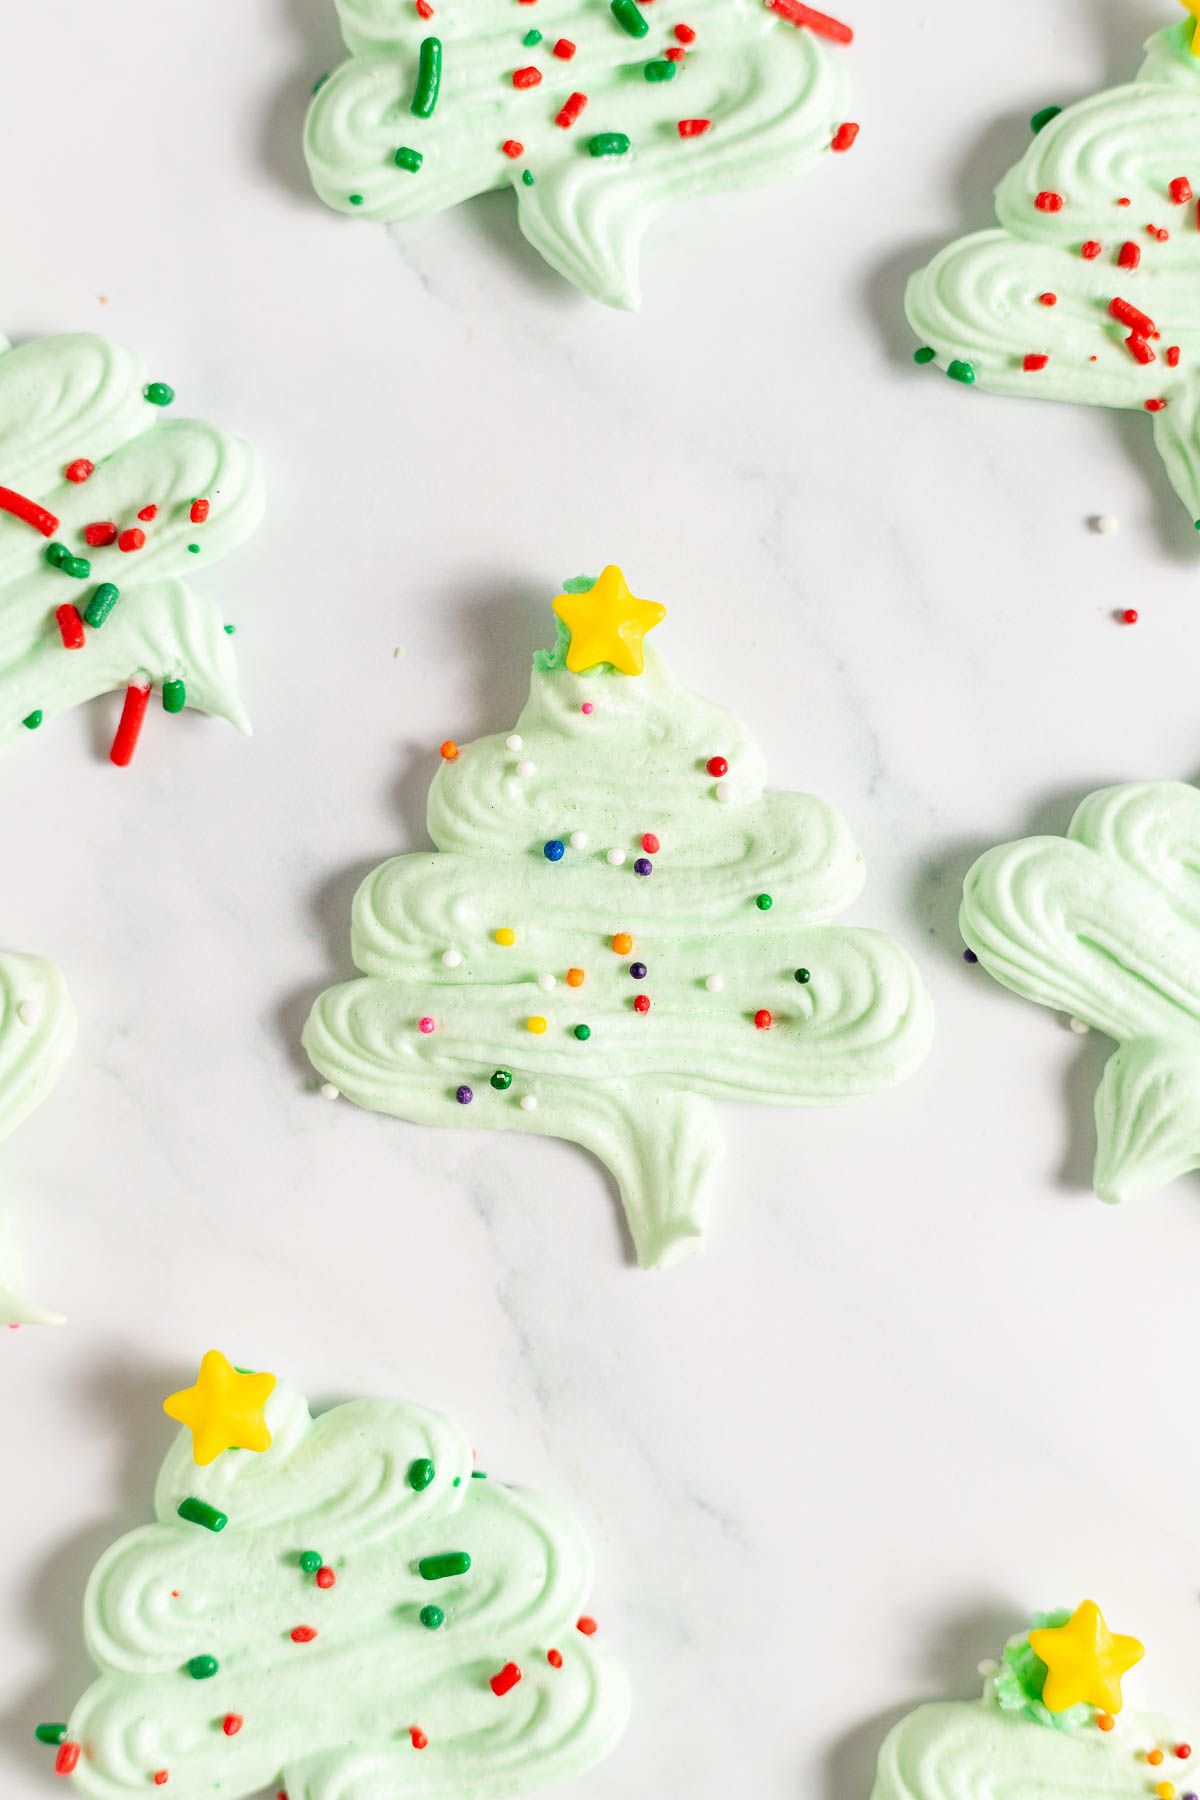 Pale green Christmas tree Meringue cookies against a white surface.